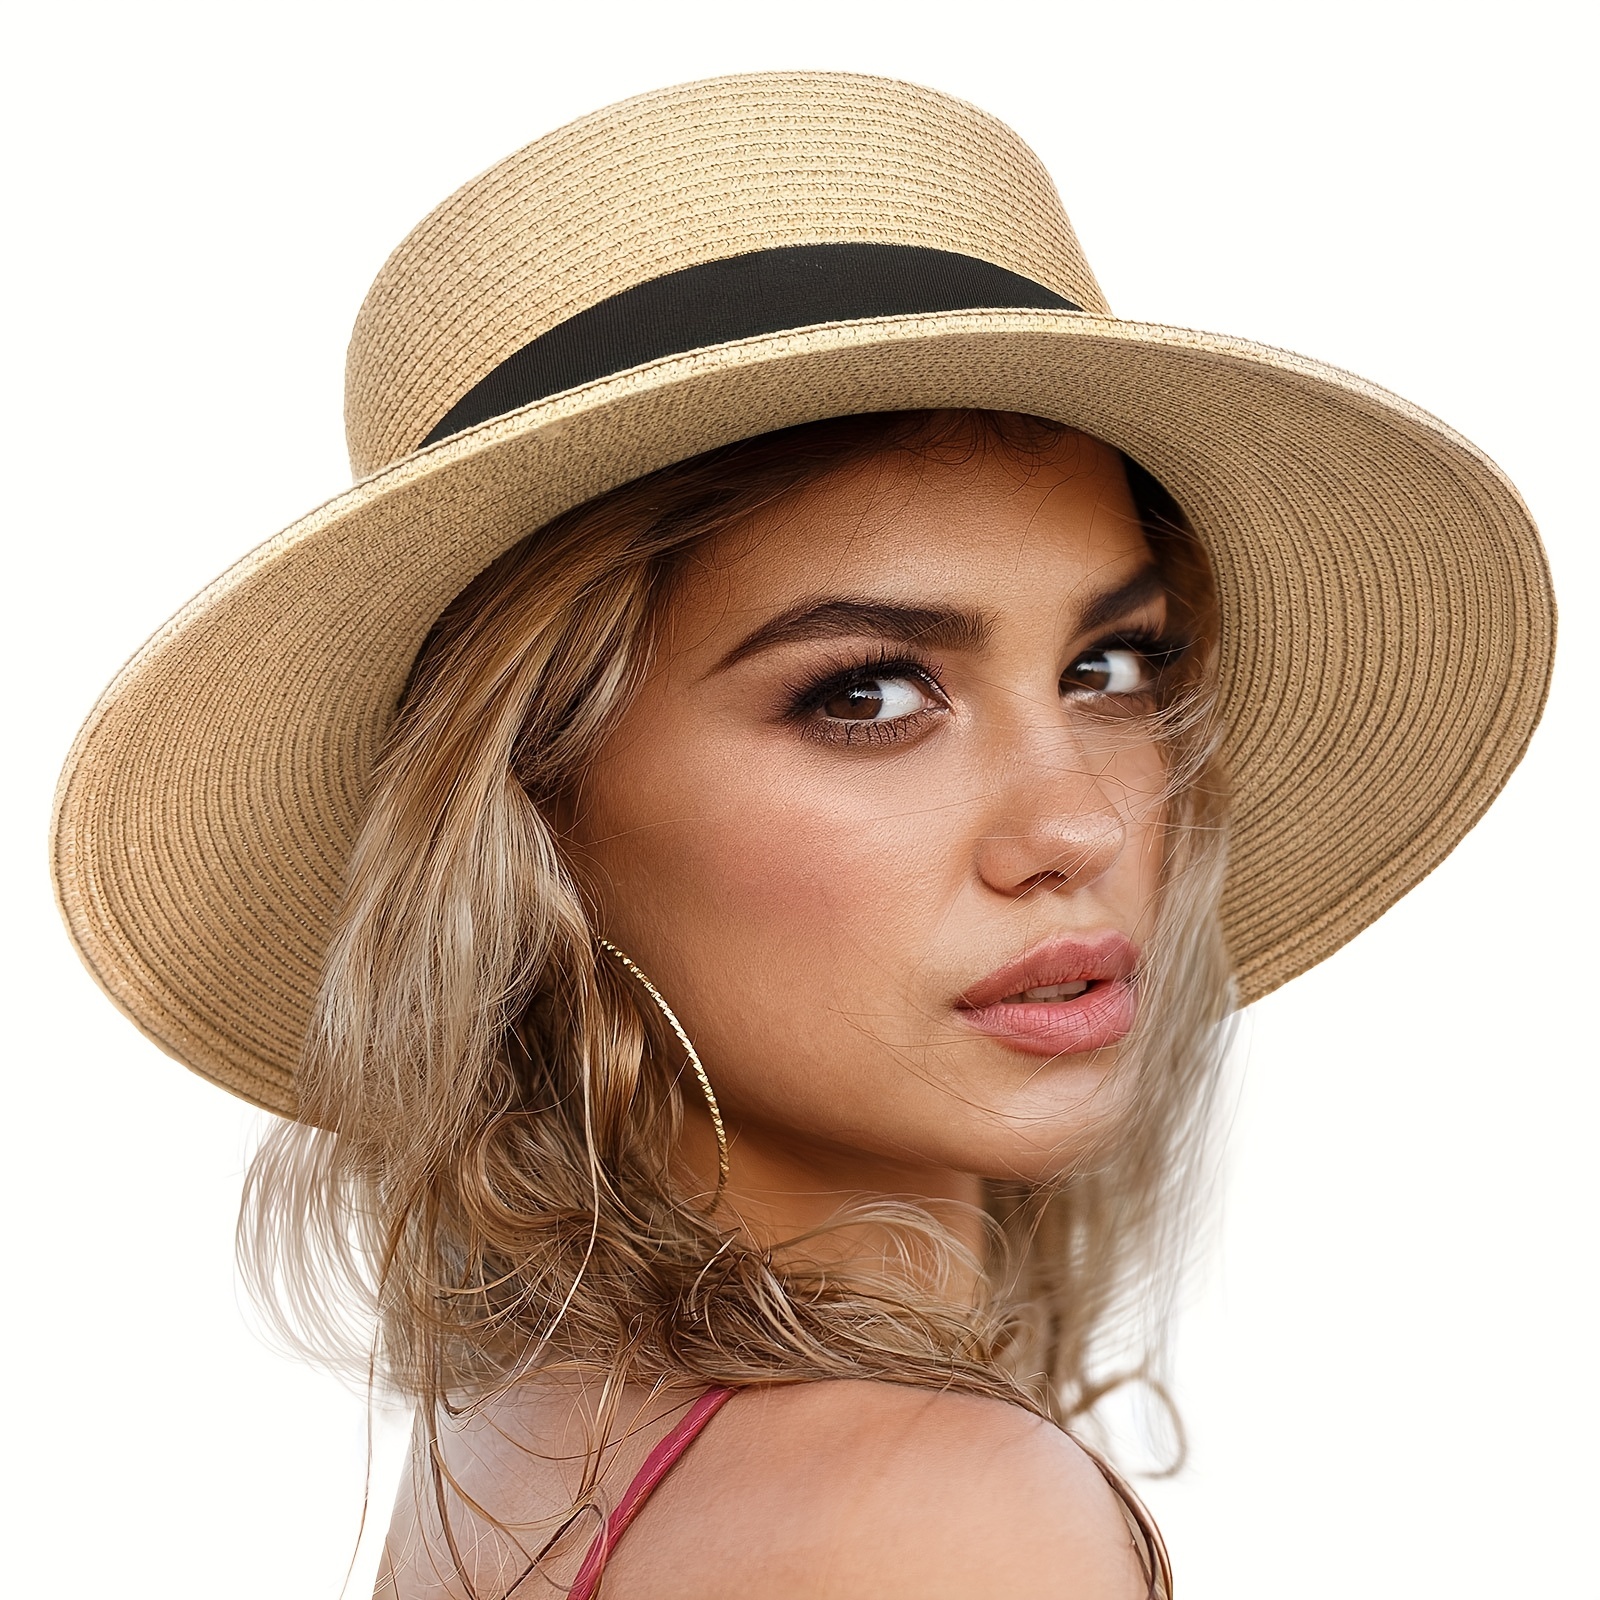 Top Straw Hat Styles for Summer